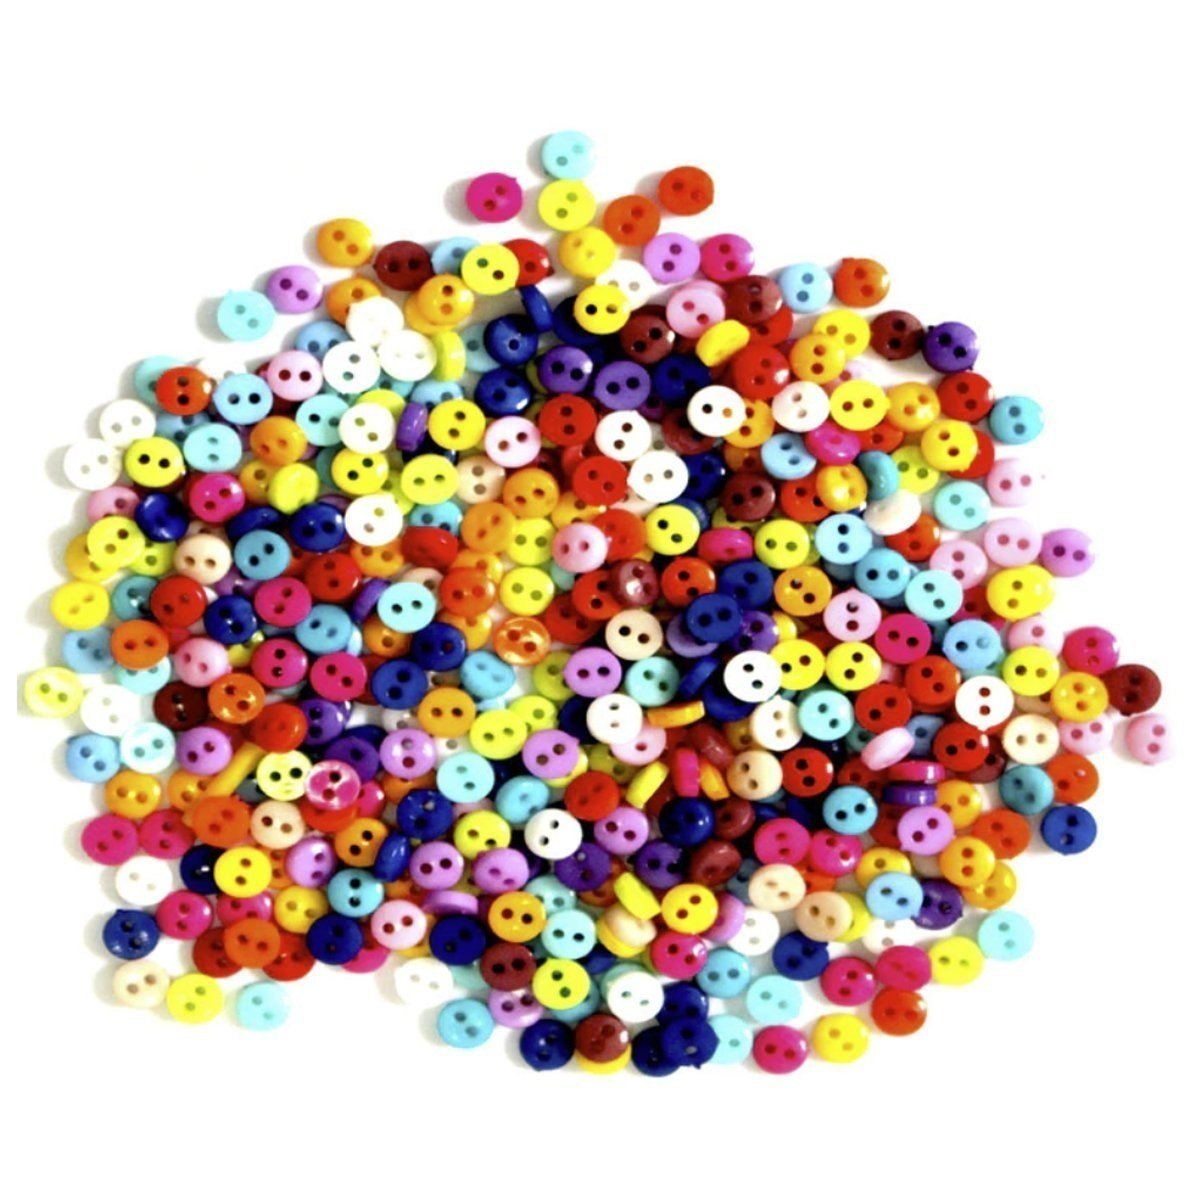 1000pcs Children's Baby's Clothing Buttons 6mm Round Colourful 2 Hole - Asia Sell